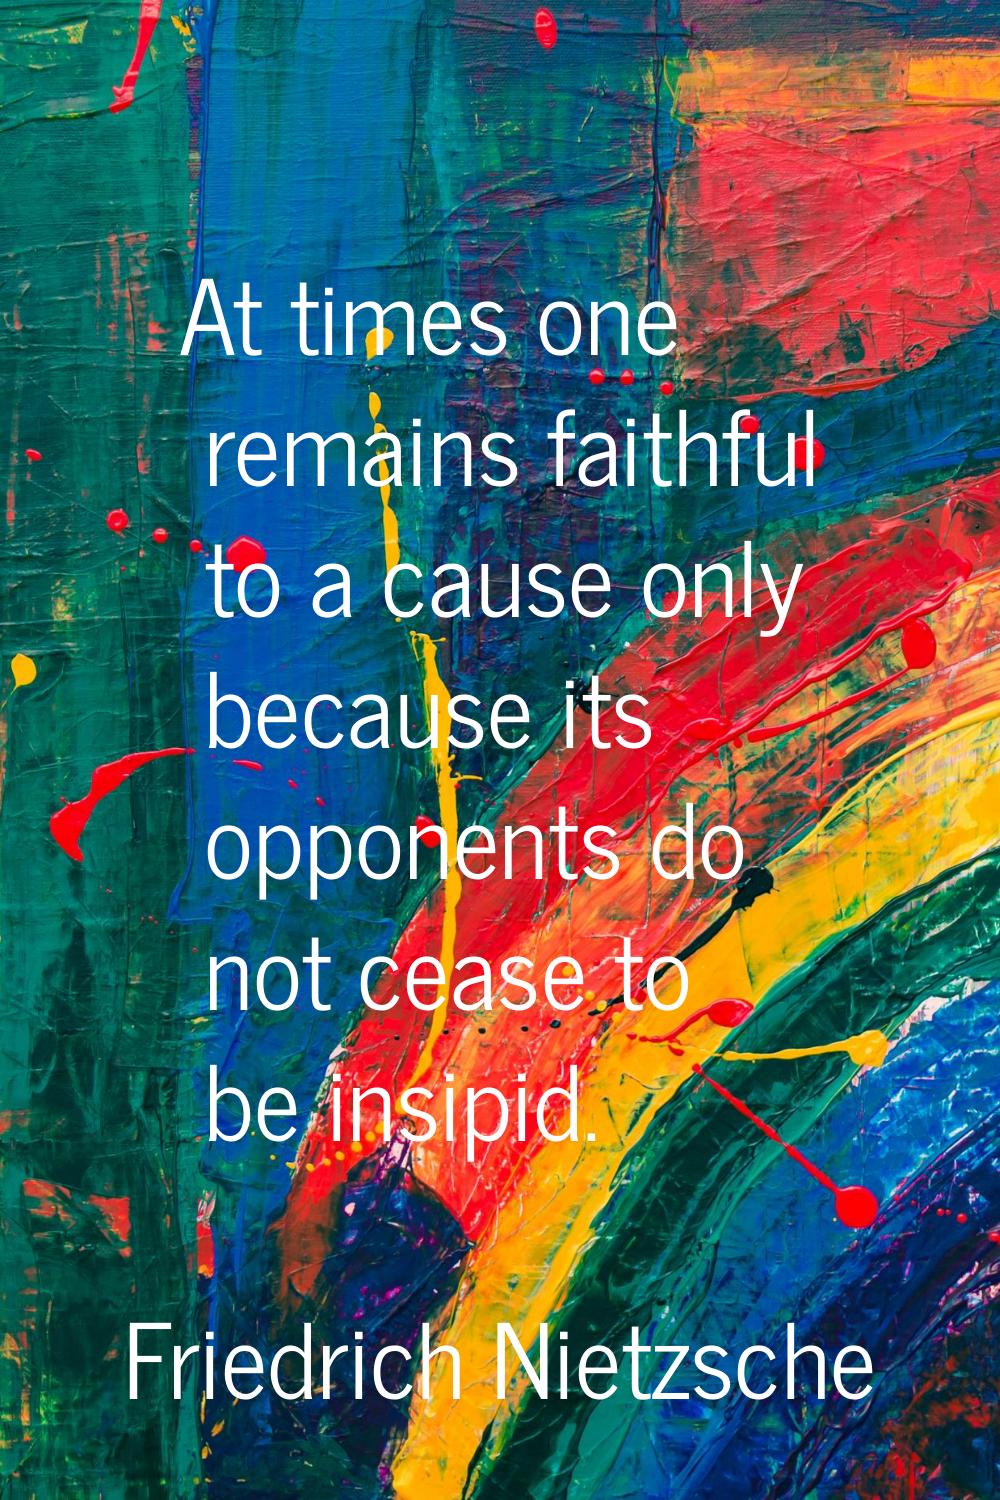 At times one remains faithful to a cause only because its opponents do not cease to be insipid.